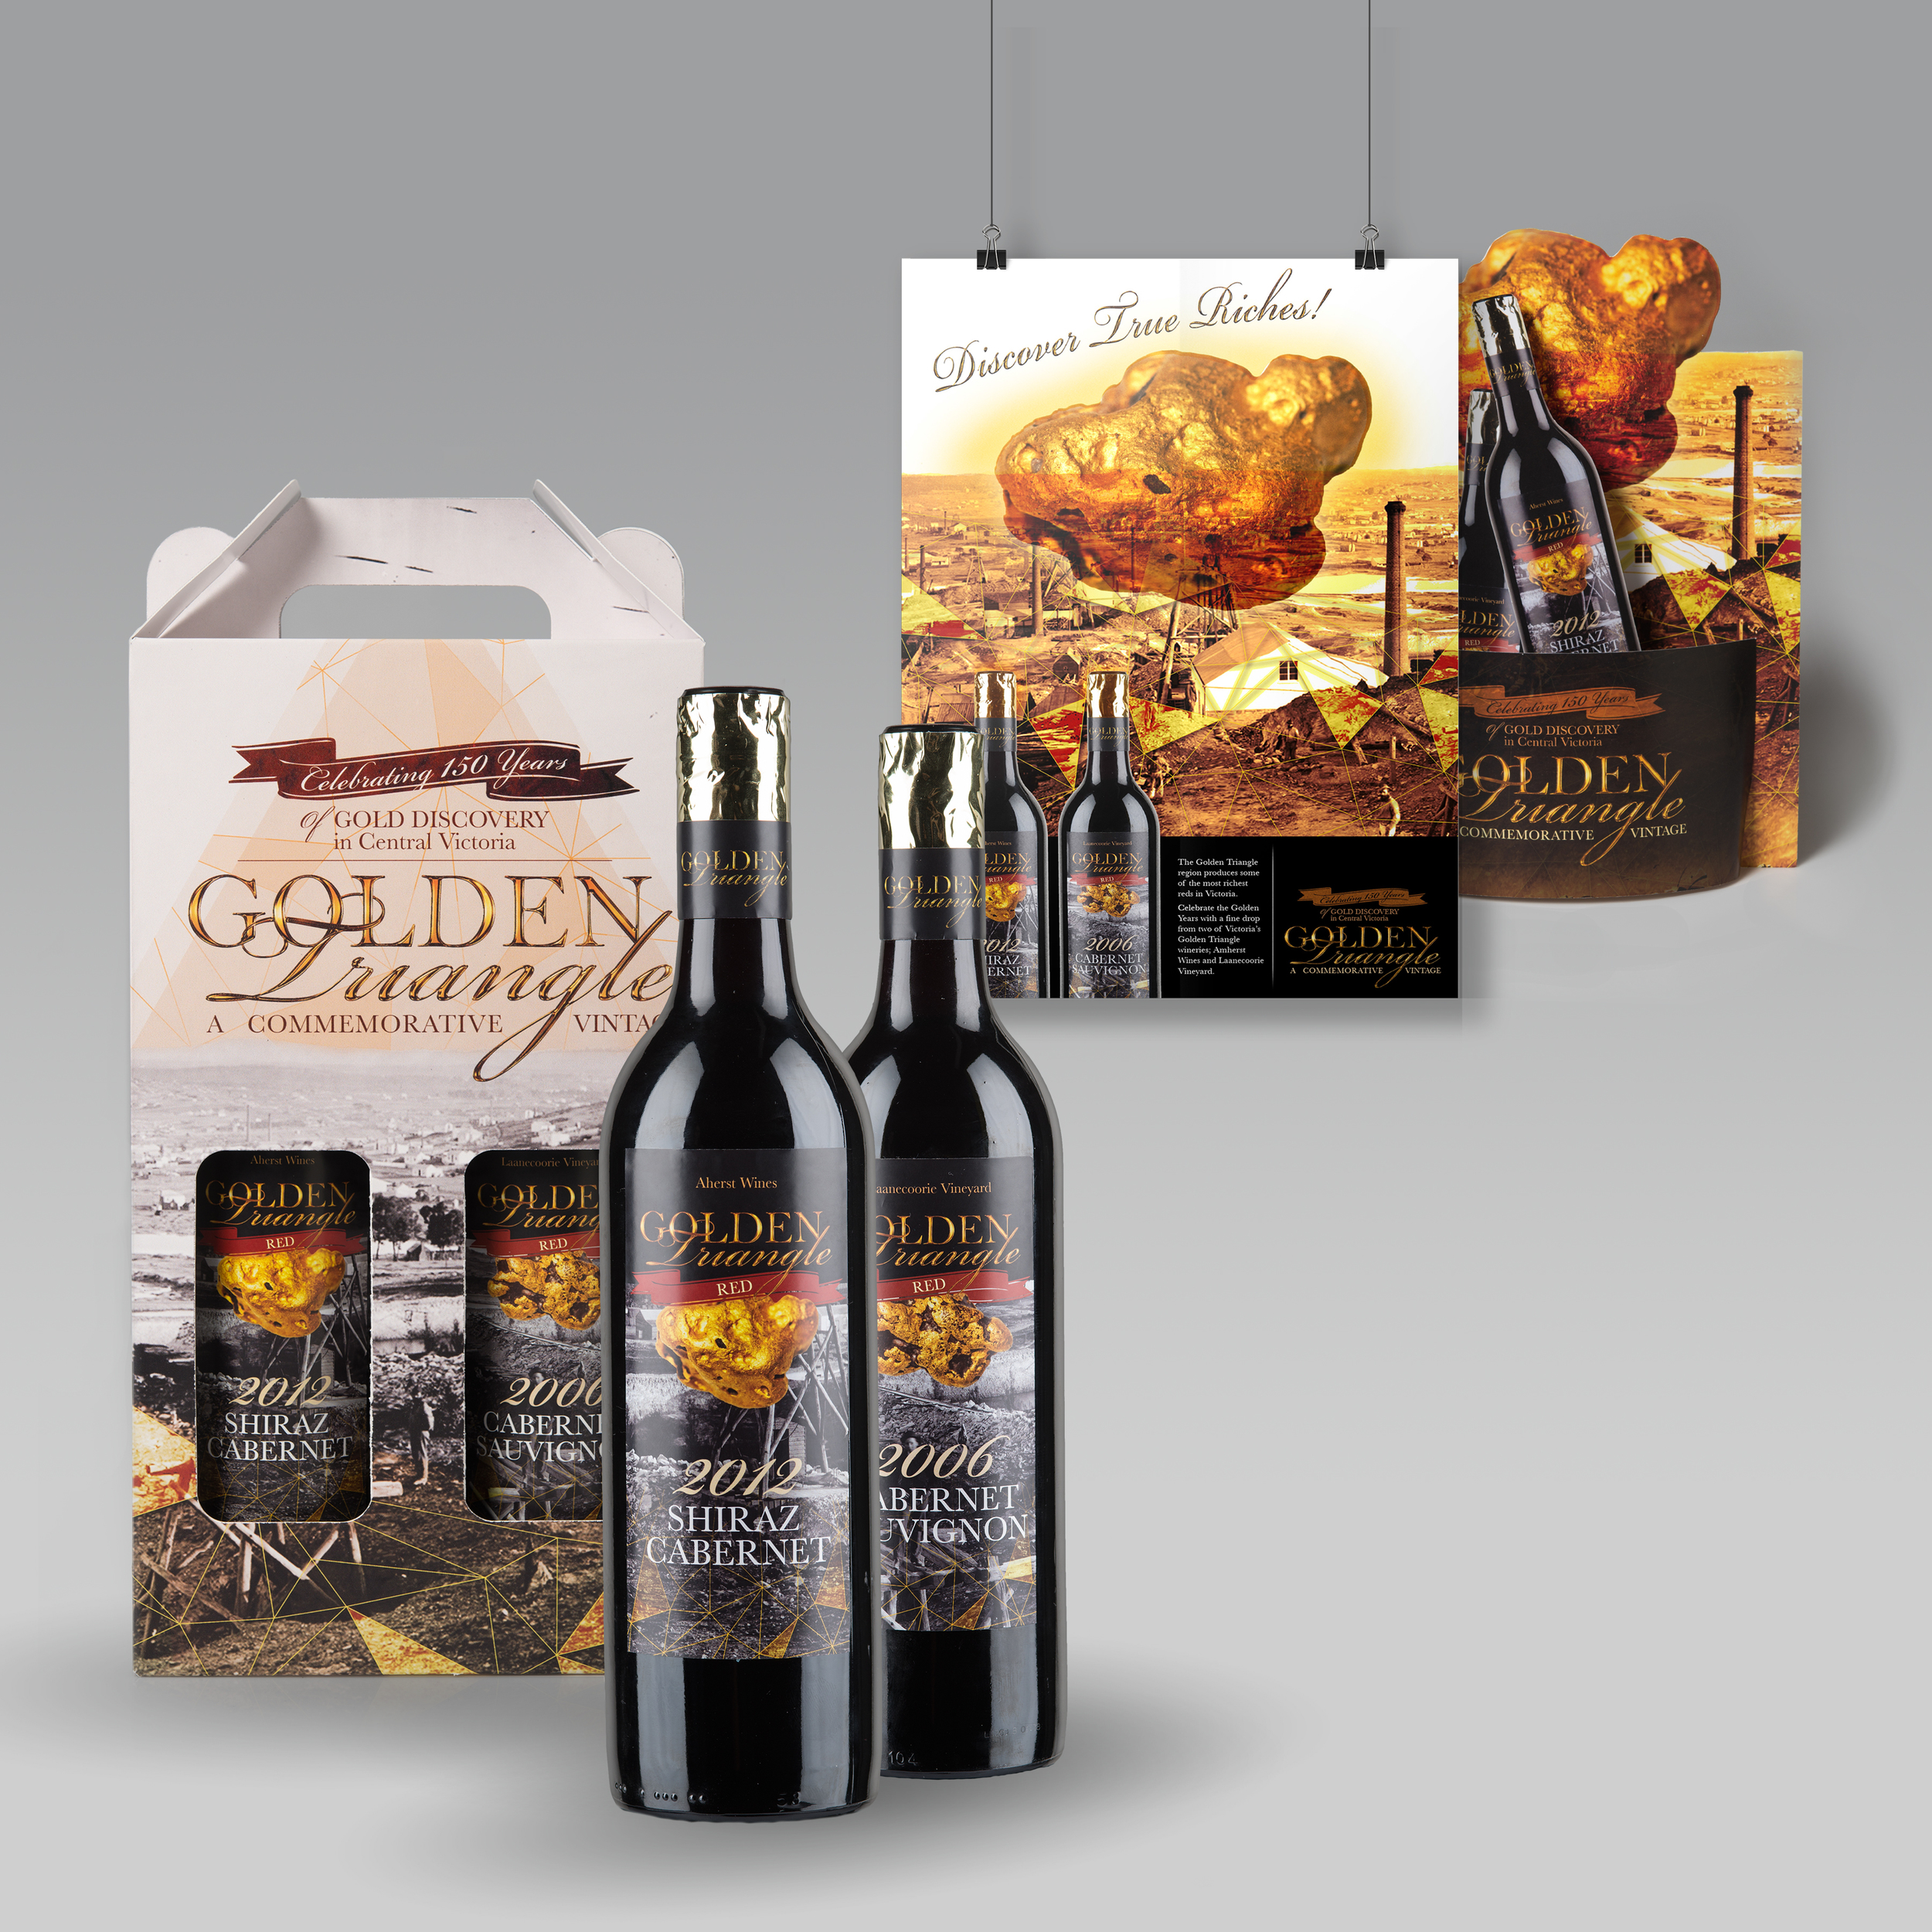  Commemorative Winebottle and Box design. Also featured: Point-of-sale display and magazine advertisement.&nbsp; 